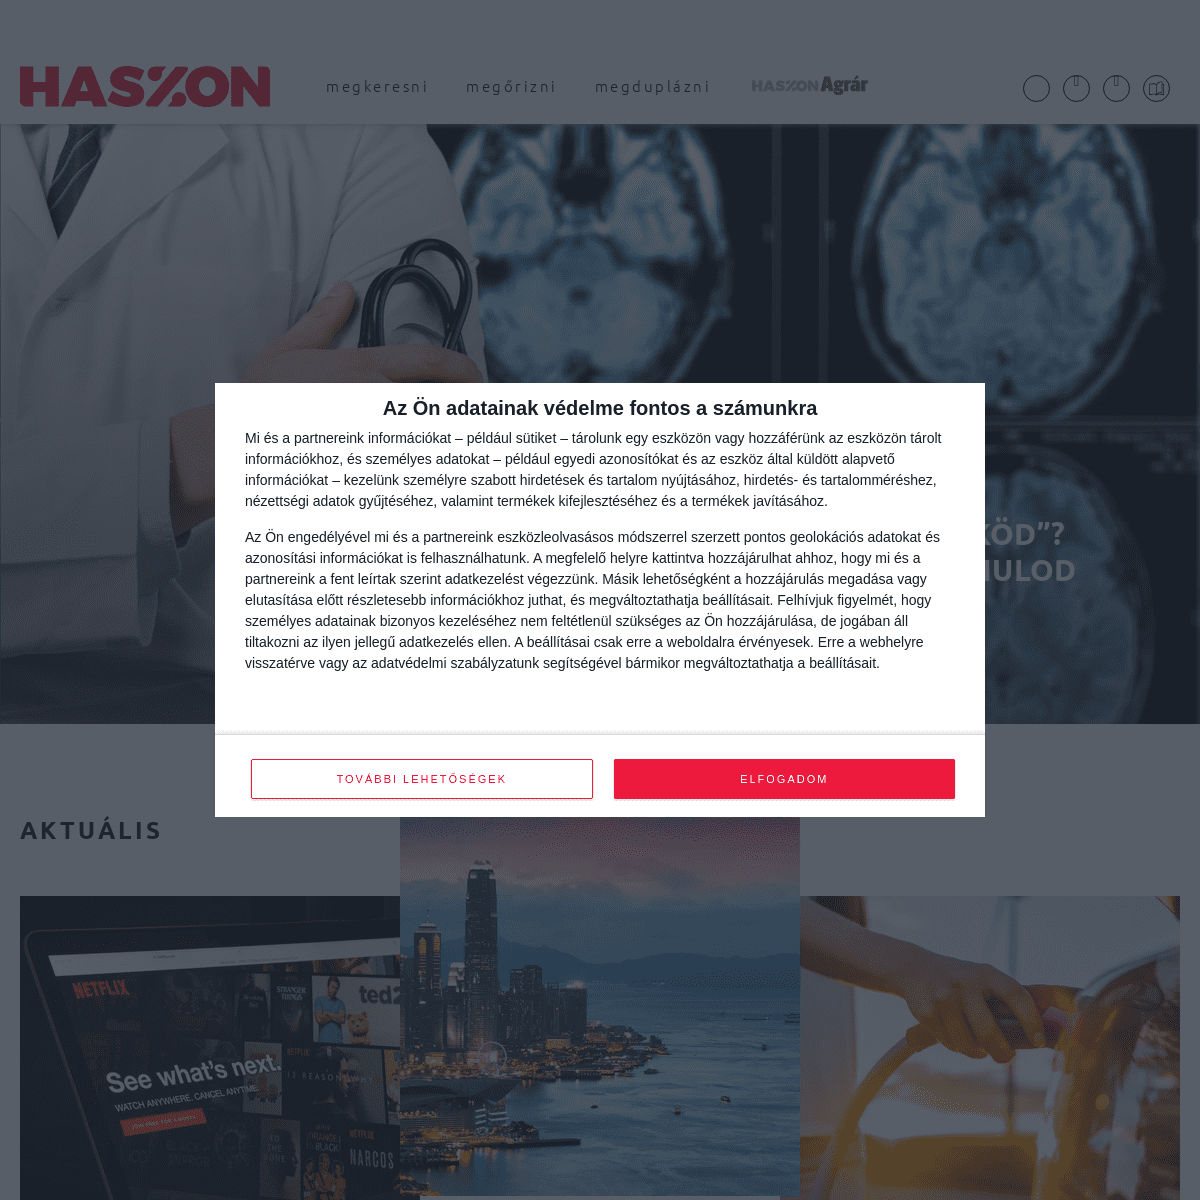 A complete backup of https://haszon.hu